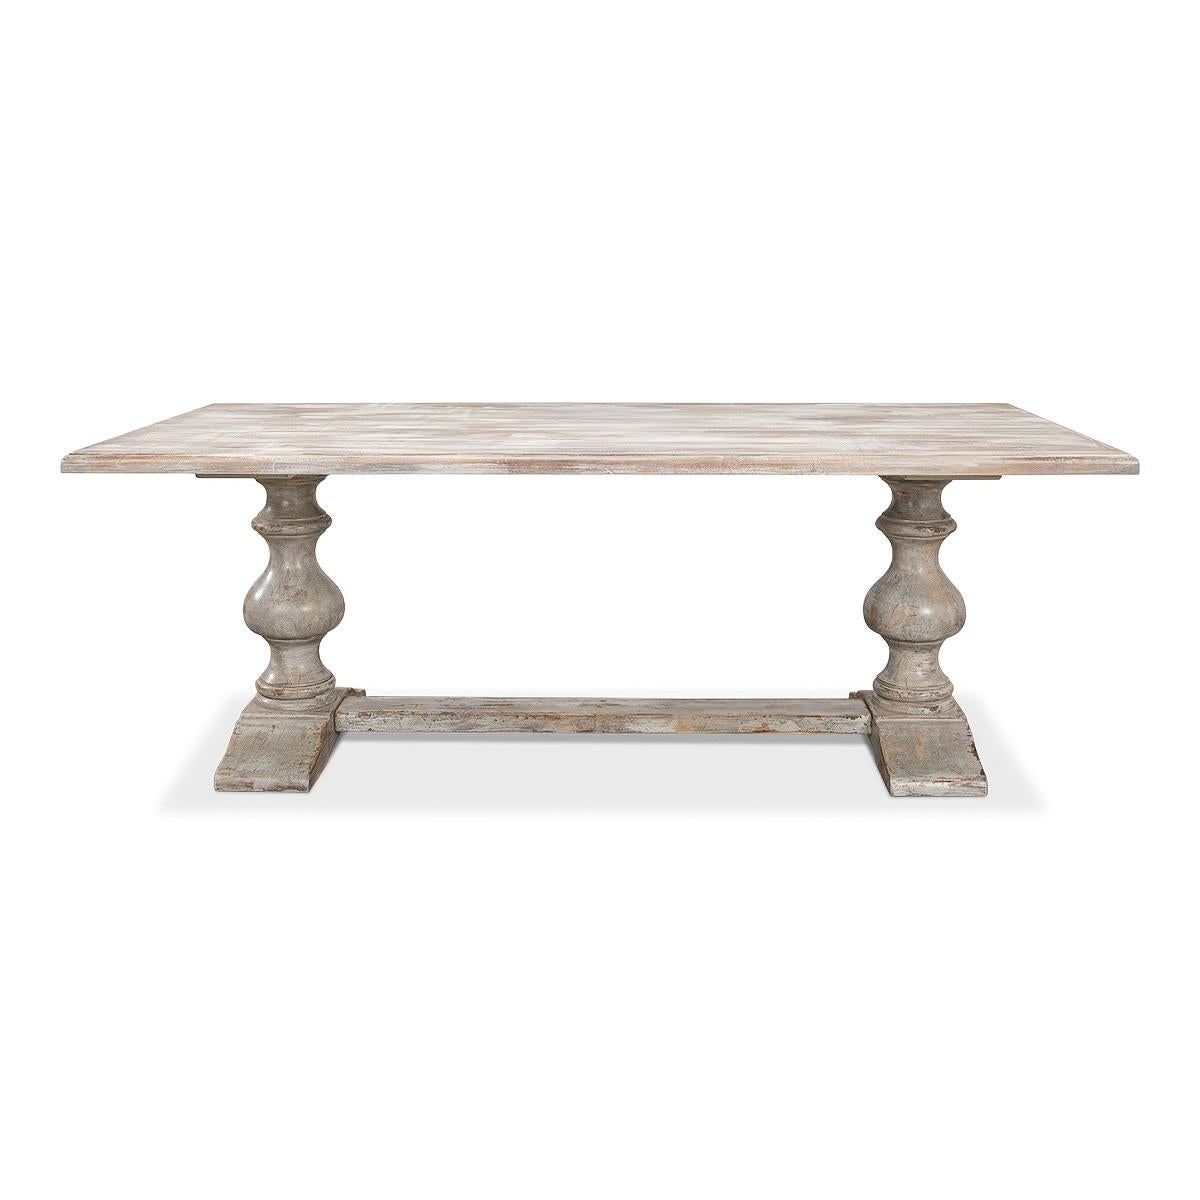 A French Provincial greyed wash painted refectory table with a unique distressed greyed painted finish. With a molded edge and raised on baluster turned legs in a trestle form with a stretcher. 

Dimensions: 84